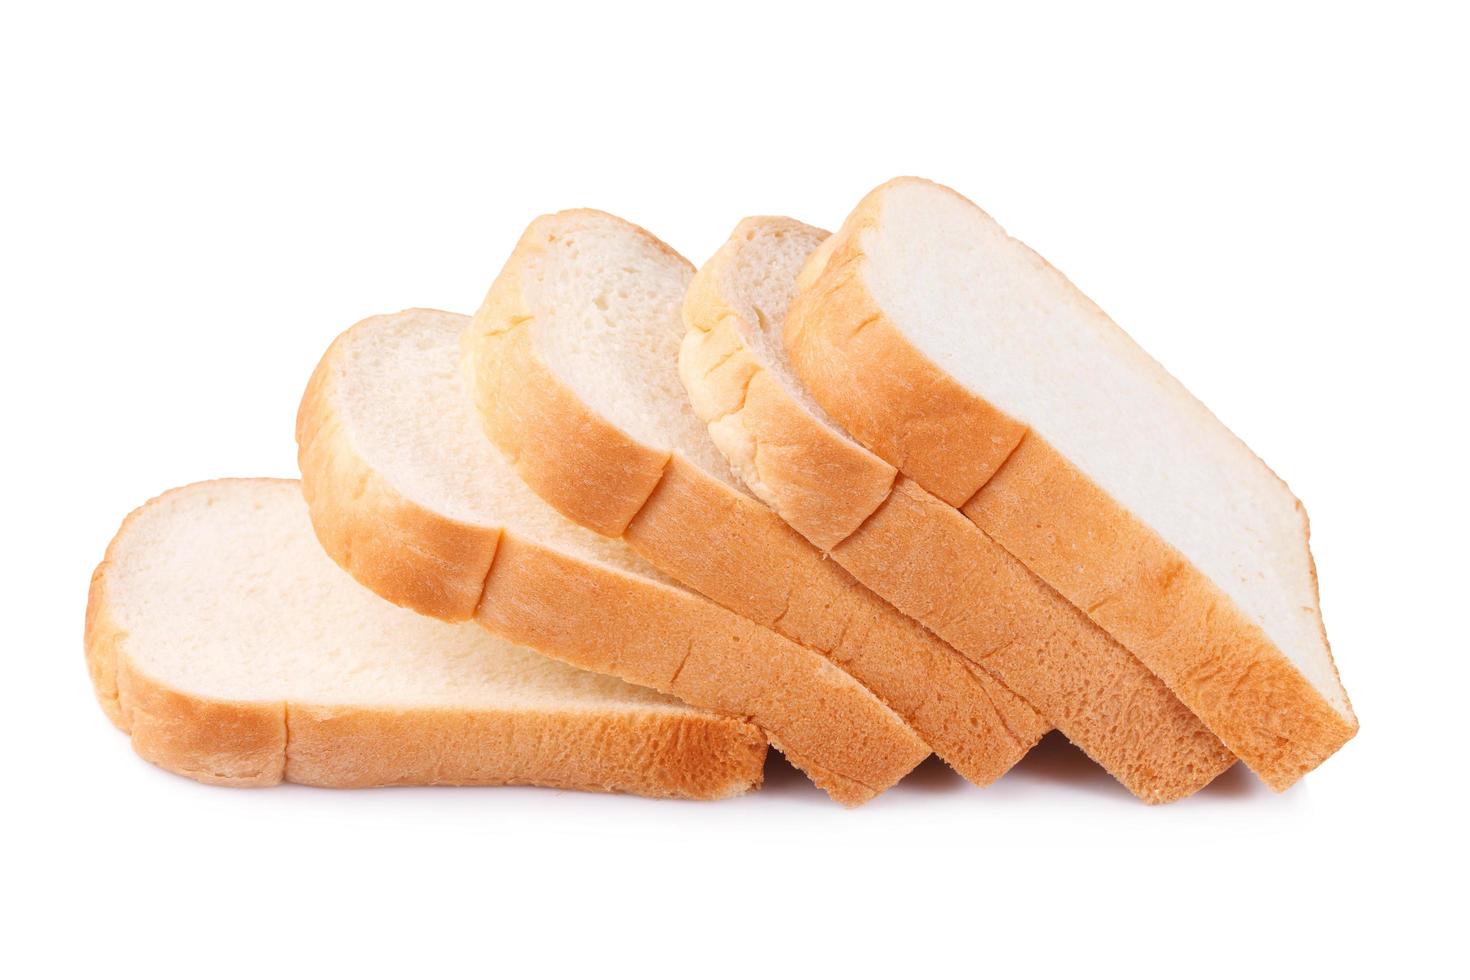 sliced bread isolated on white background photo